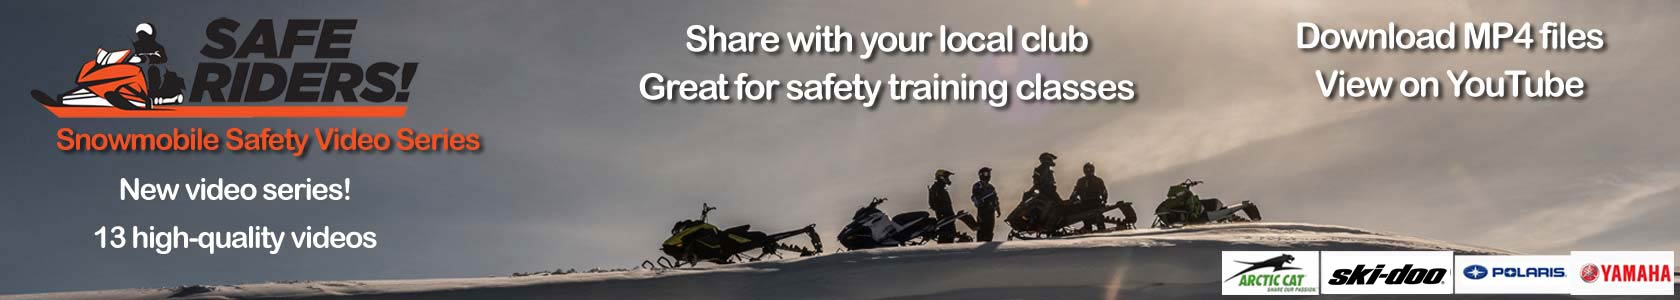 Safe Riders Snowmobiling Video Series